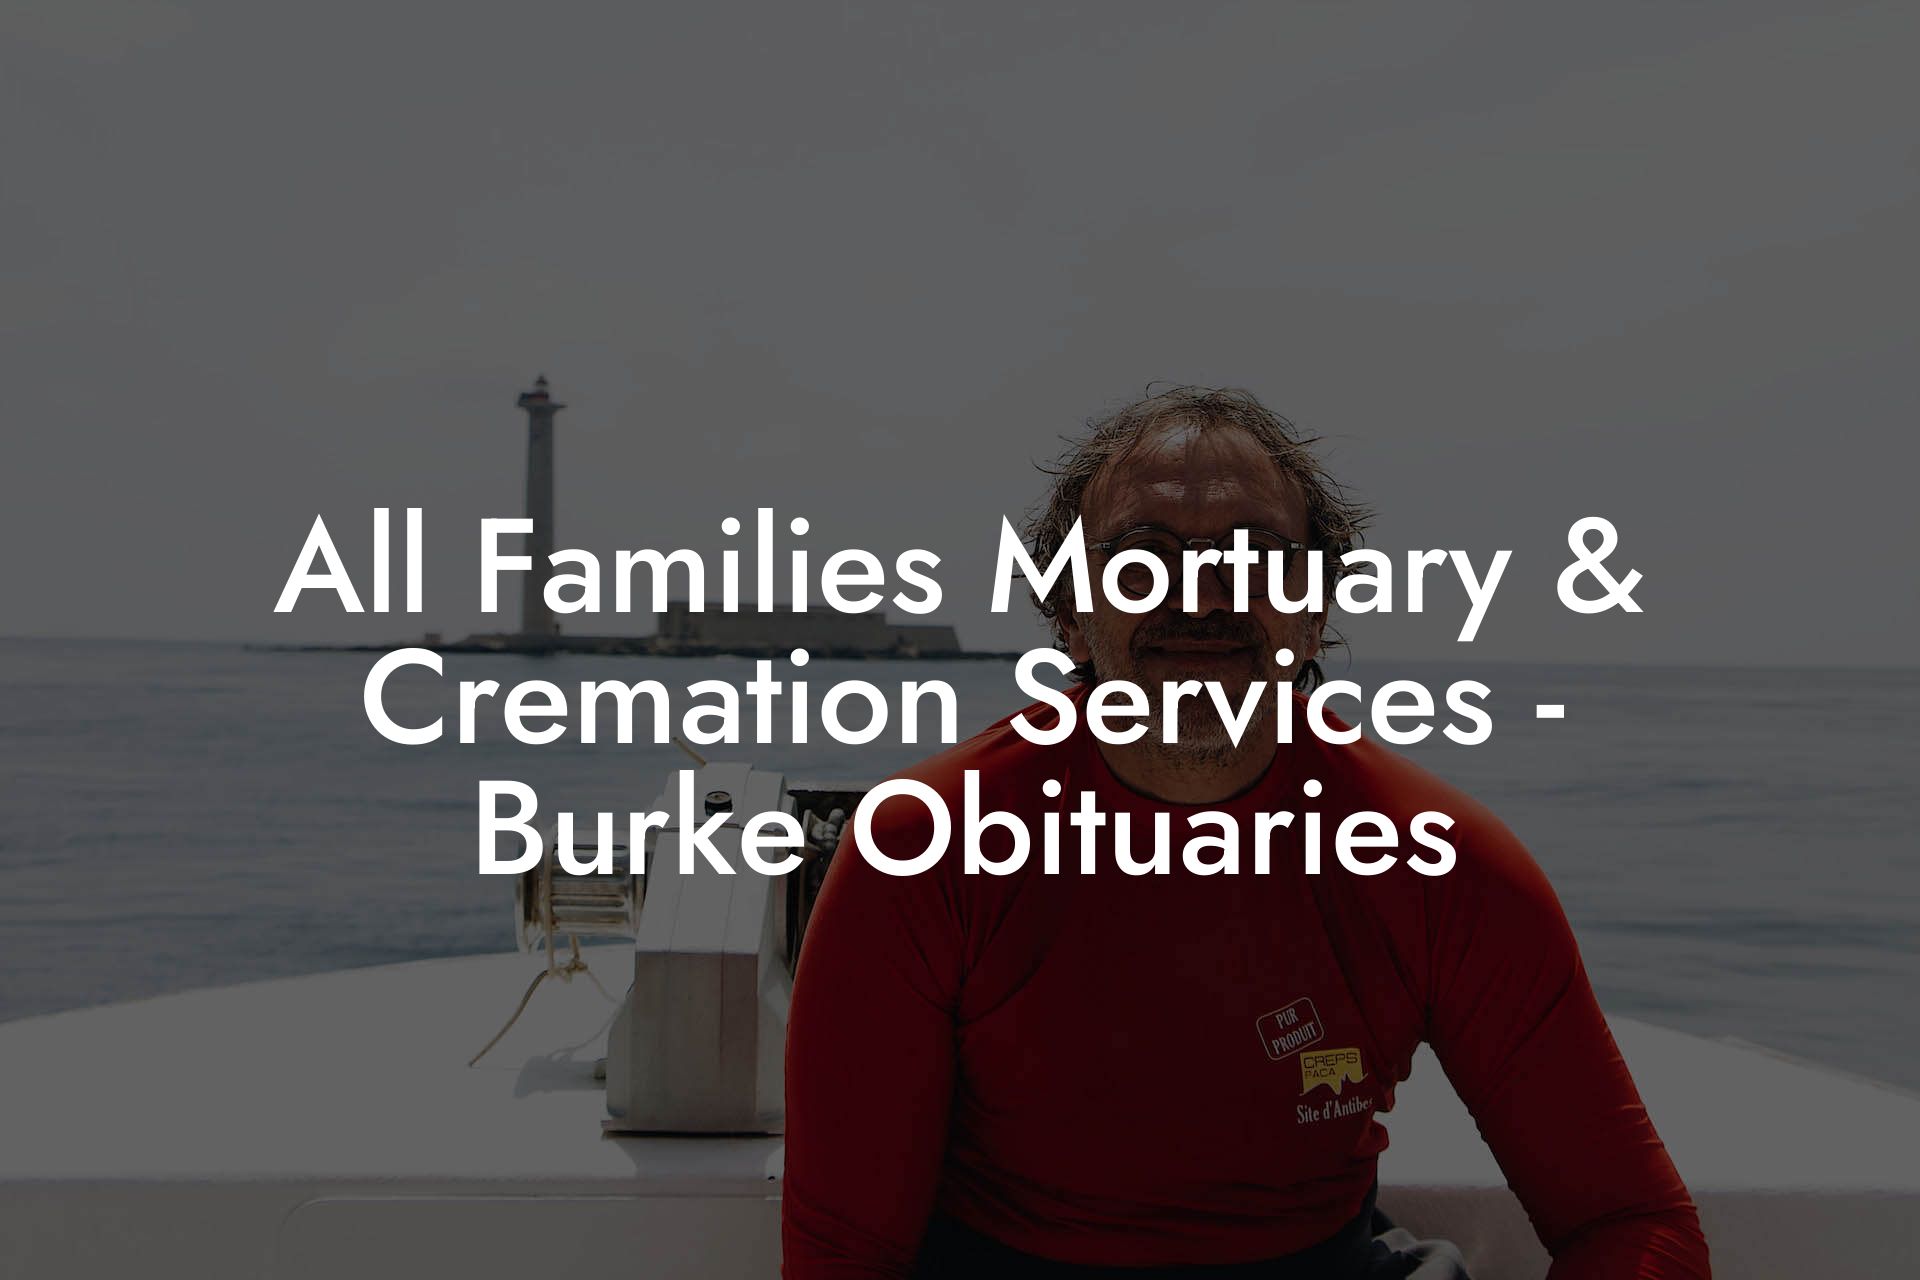 All Families Mortuary & Cremation Services - Burke Obituaries